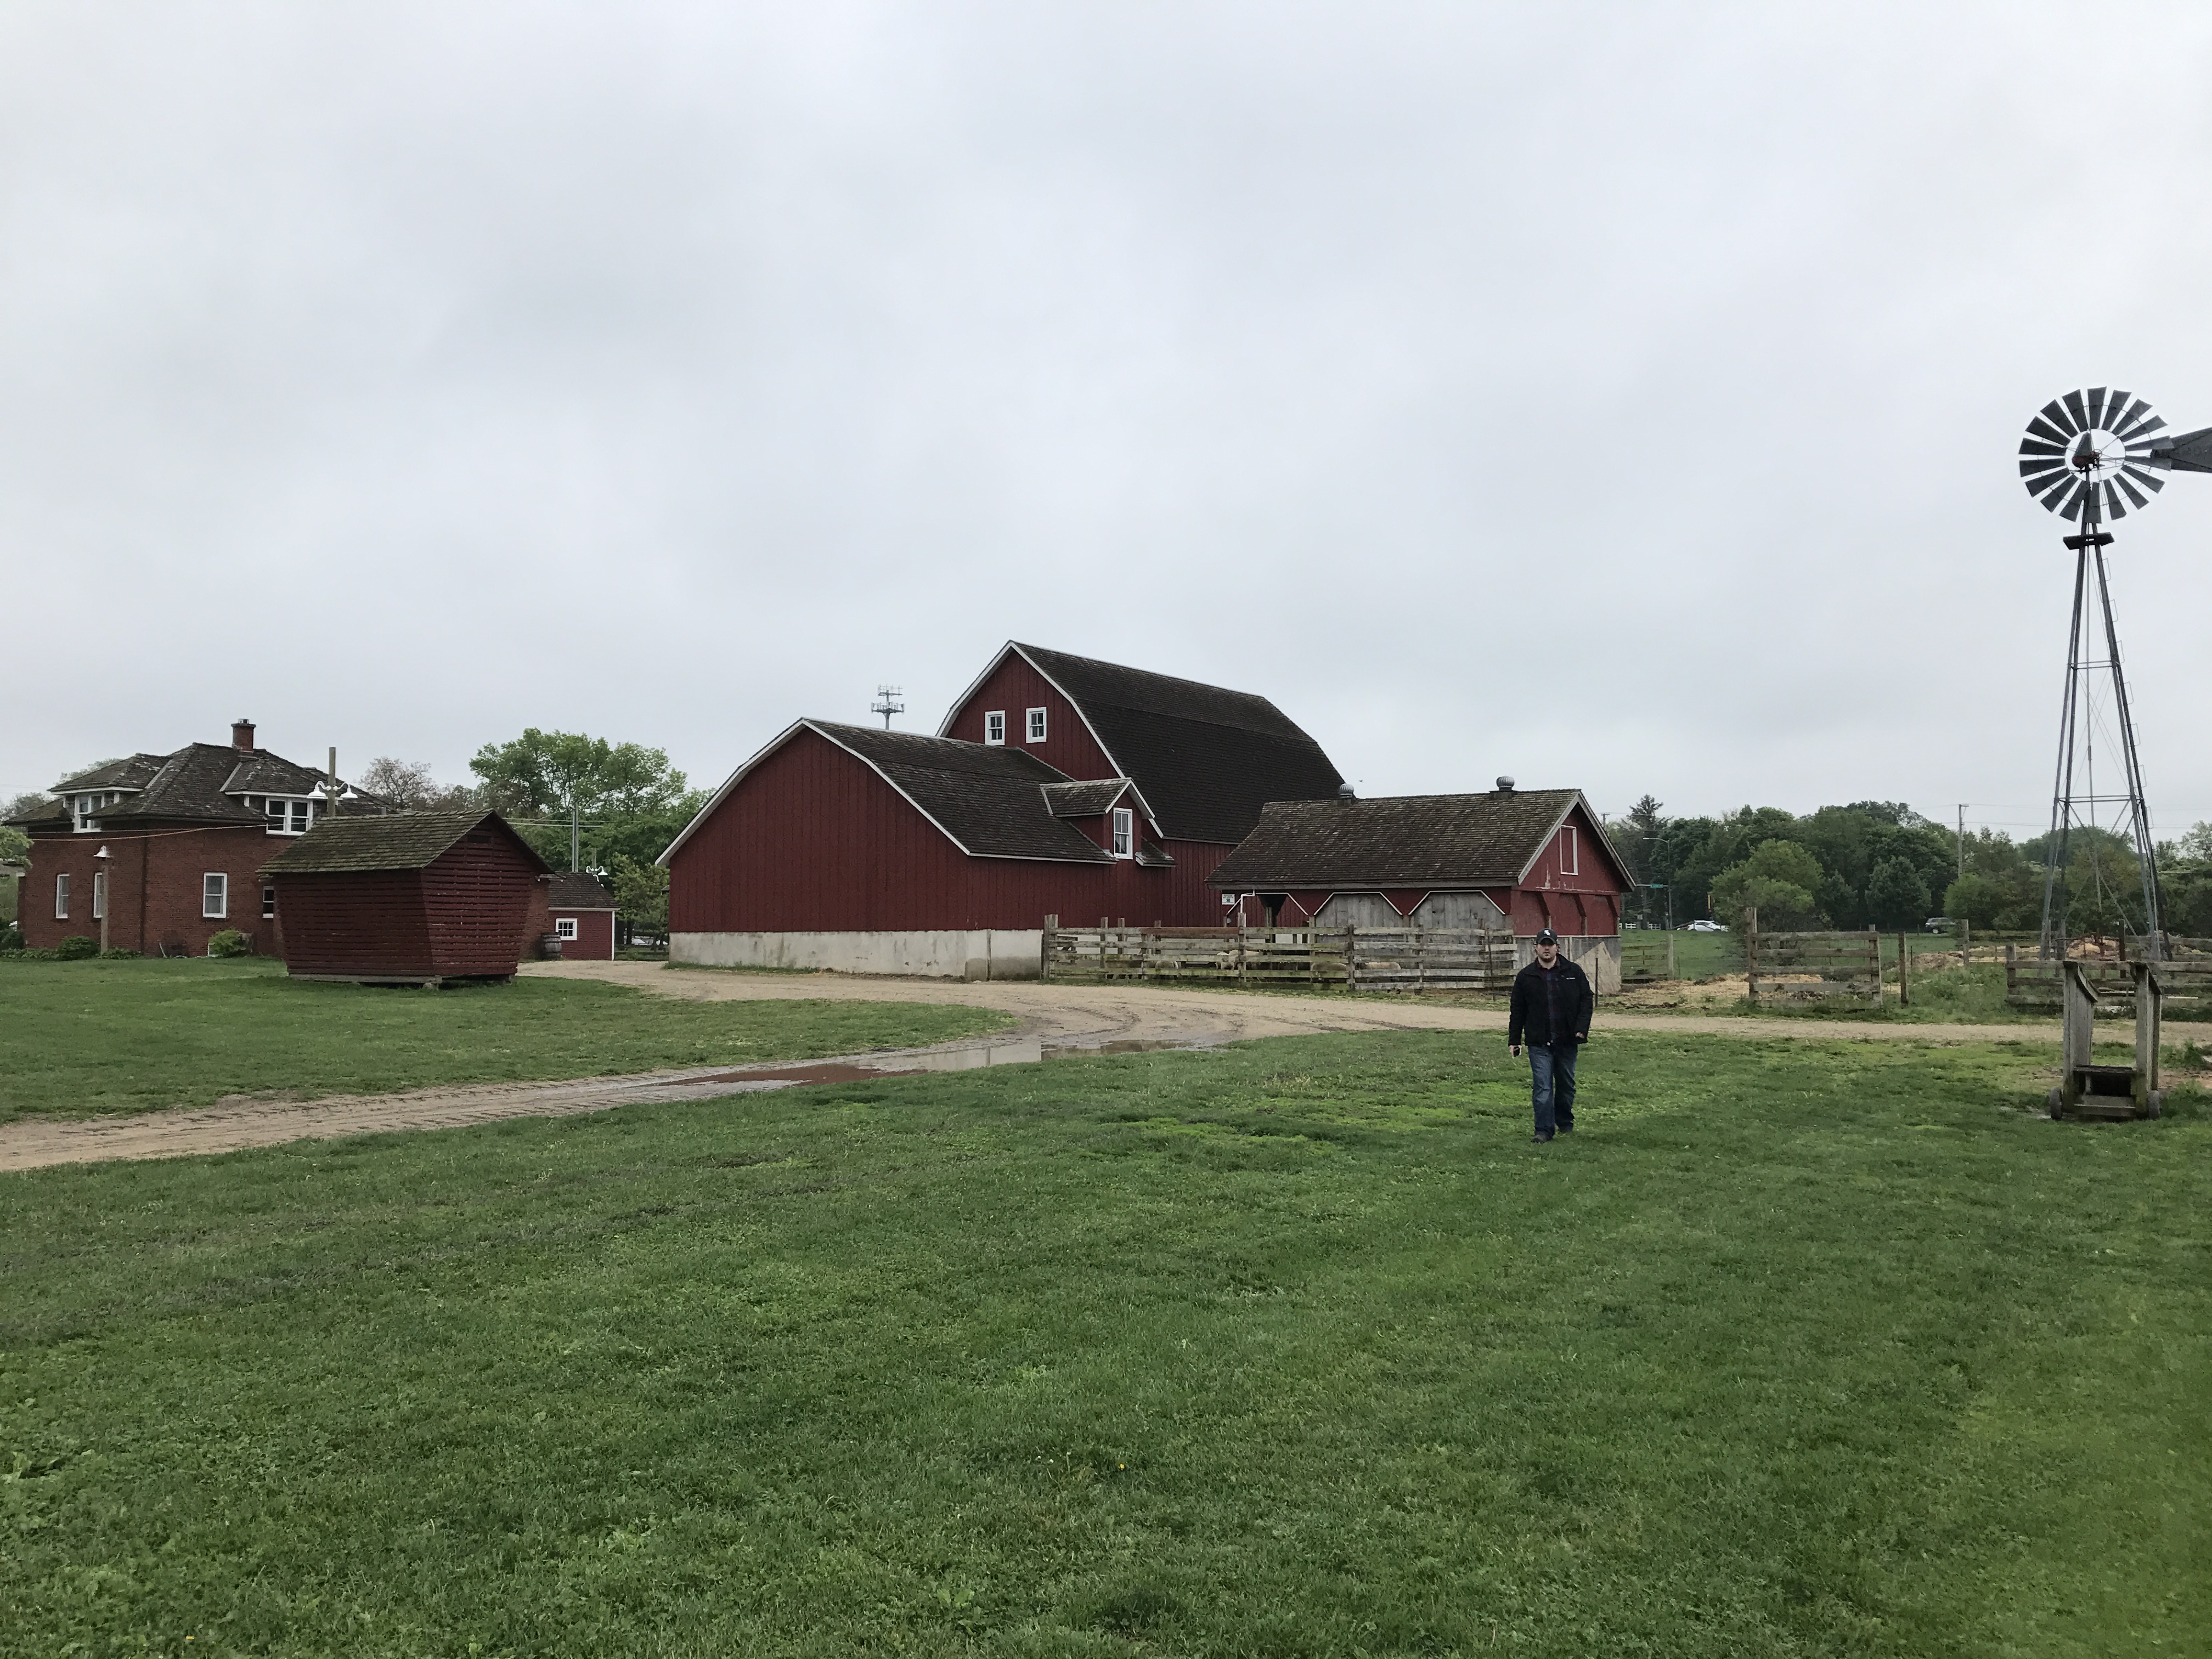 Nick Volkert walking in front of the windmill, barn and farm house at Historic Wagner Farm in Glenview, IL.